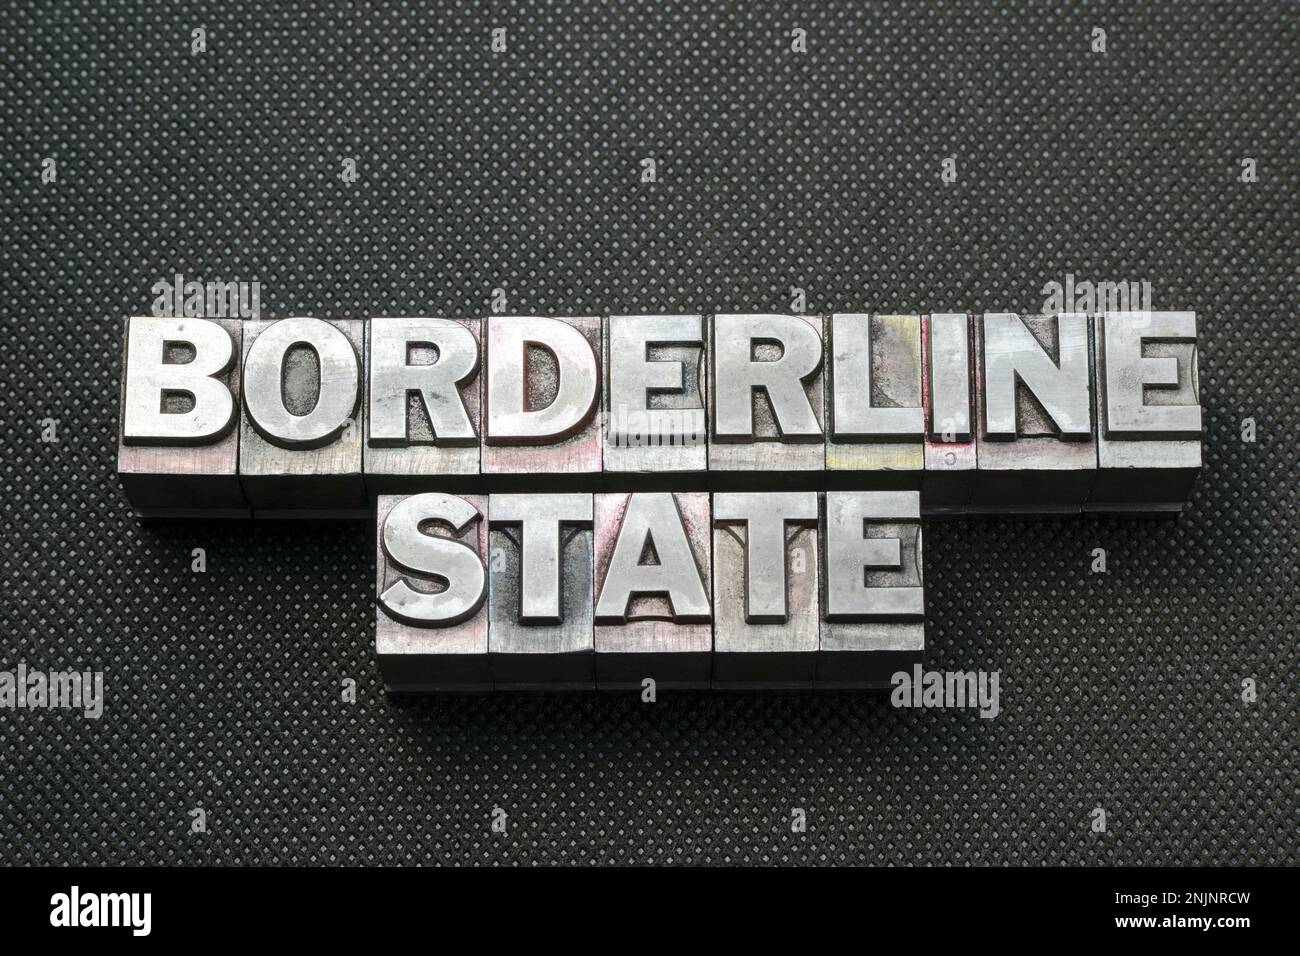 borderline state phrase made from metallic letterpress blocks on black perforated surface Stock Photo